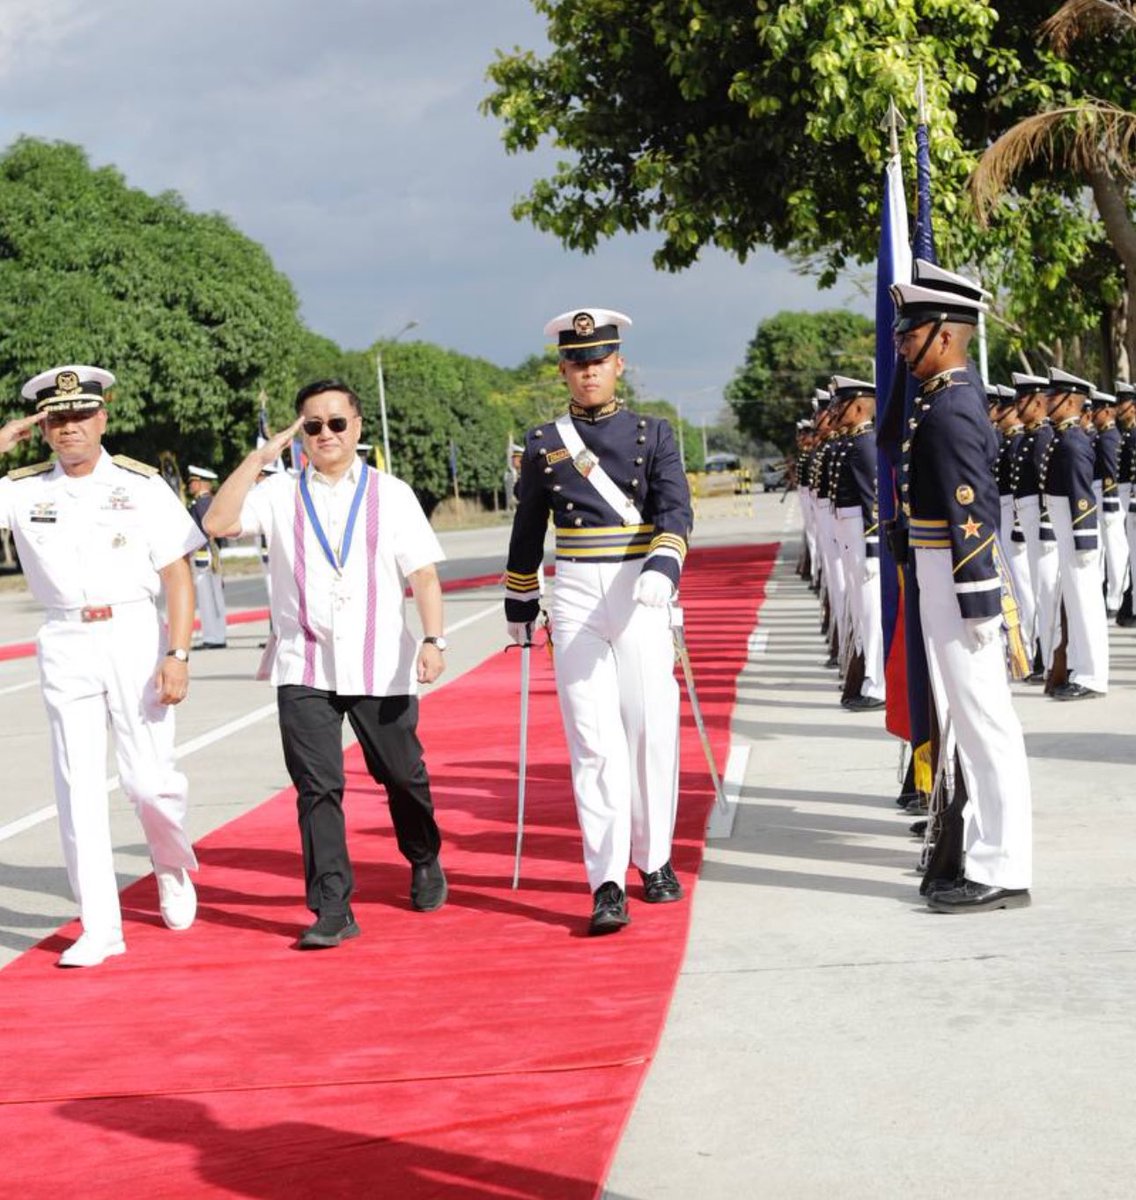 Its an honor to grace the shoulder board donning ceremony of the Philippine Merchants Marine Academy - a 204 year-old institution serving the maritime industry , situated near the West Philippine Sea in San Narciso, Zambales. Congratulations!